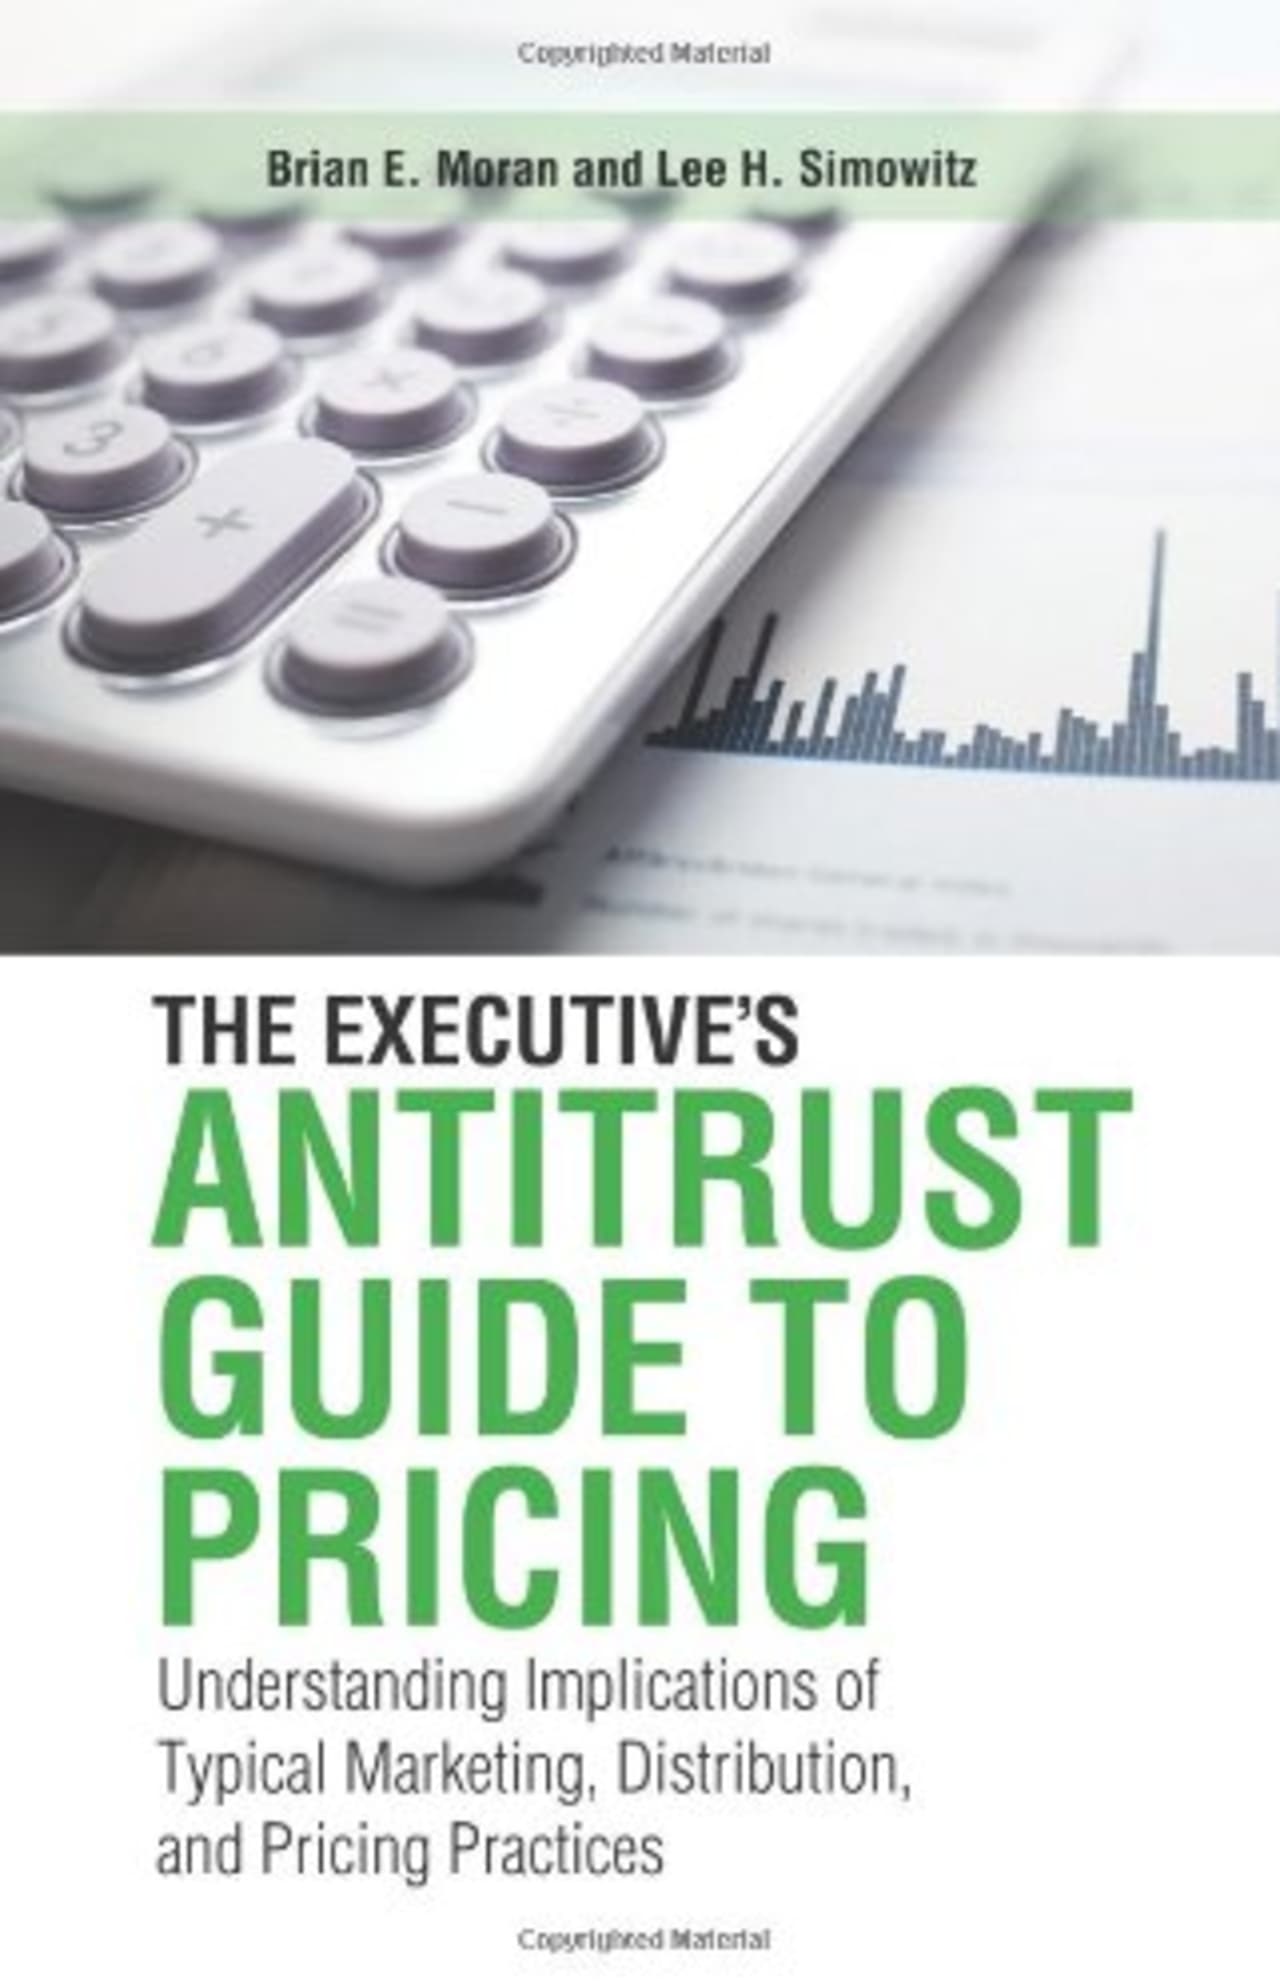 New Canaan's Brian E. Moran has co-authored a new book on antitrust for executives. 